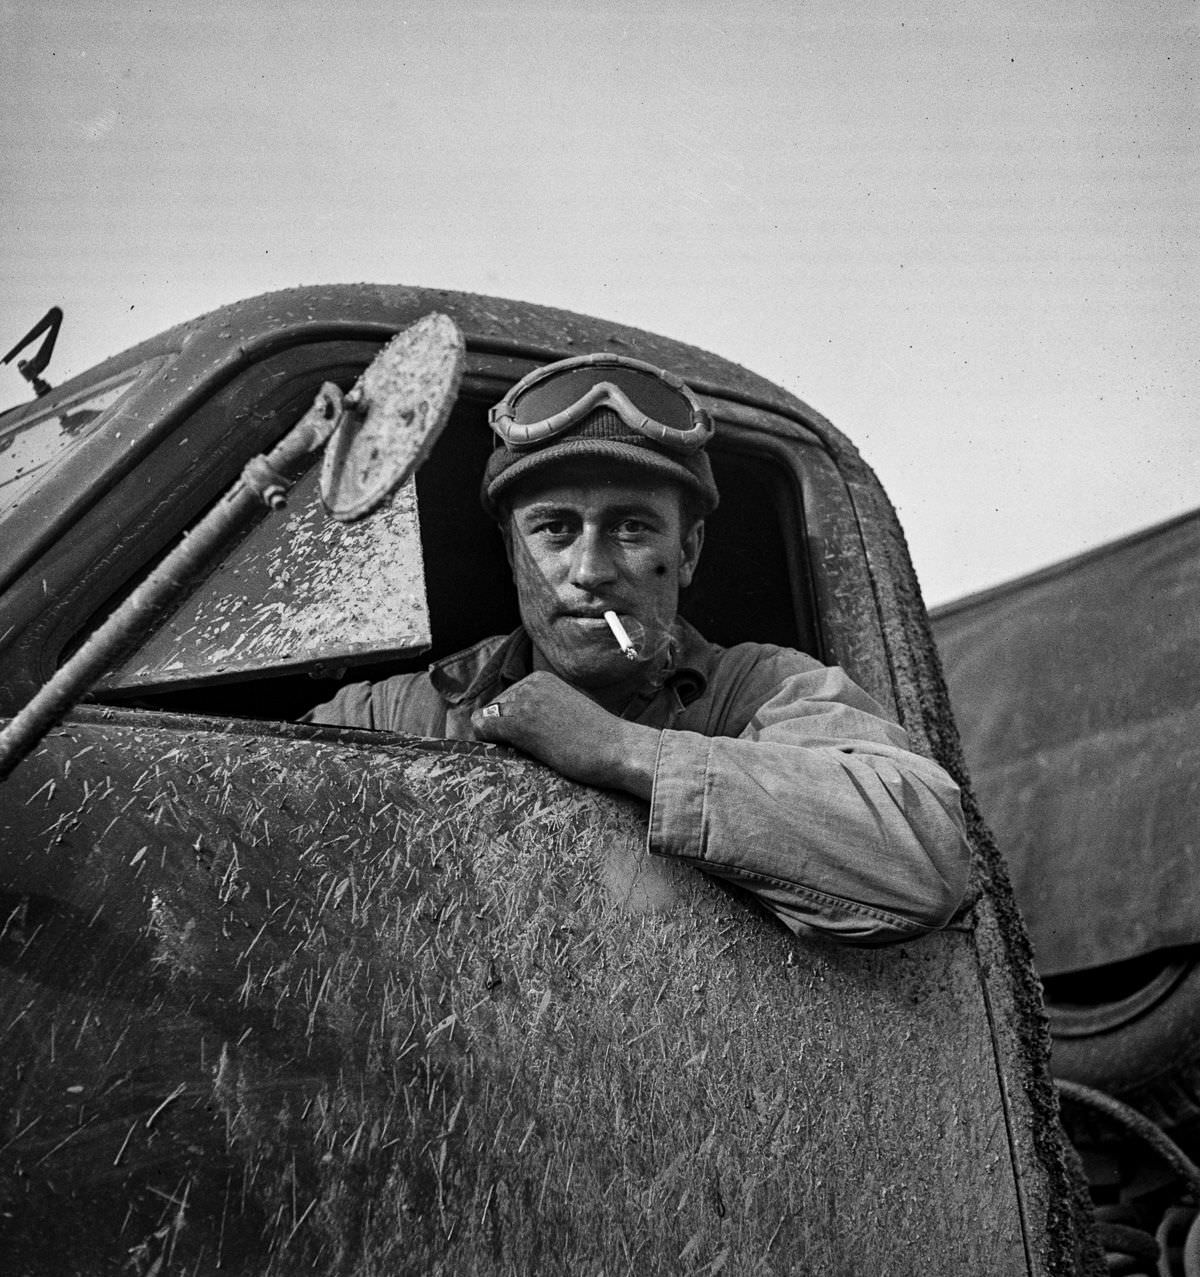 Private Charles Nasholts of Auburn, New York, a mechanic in civilian life.